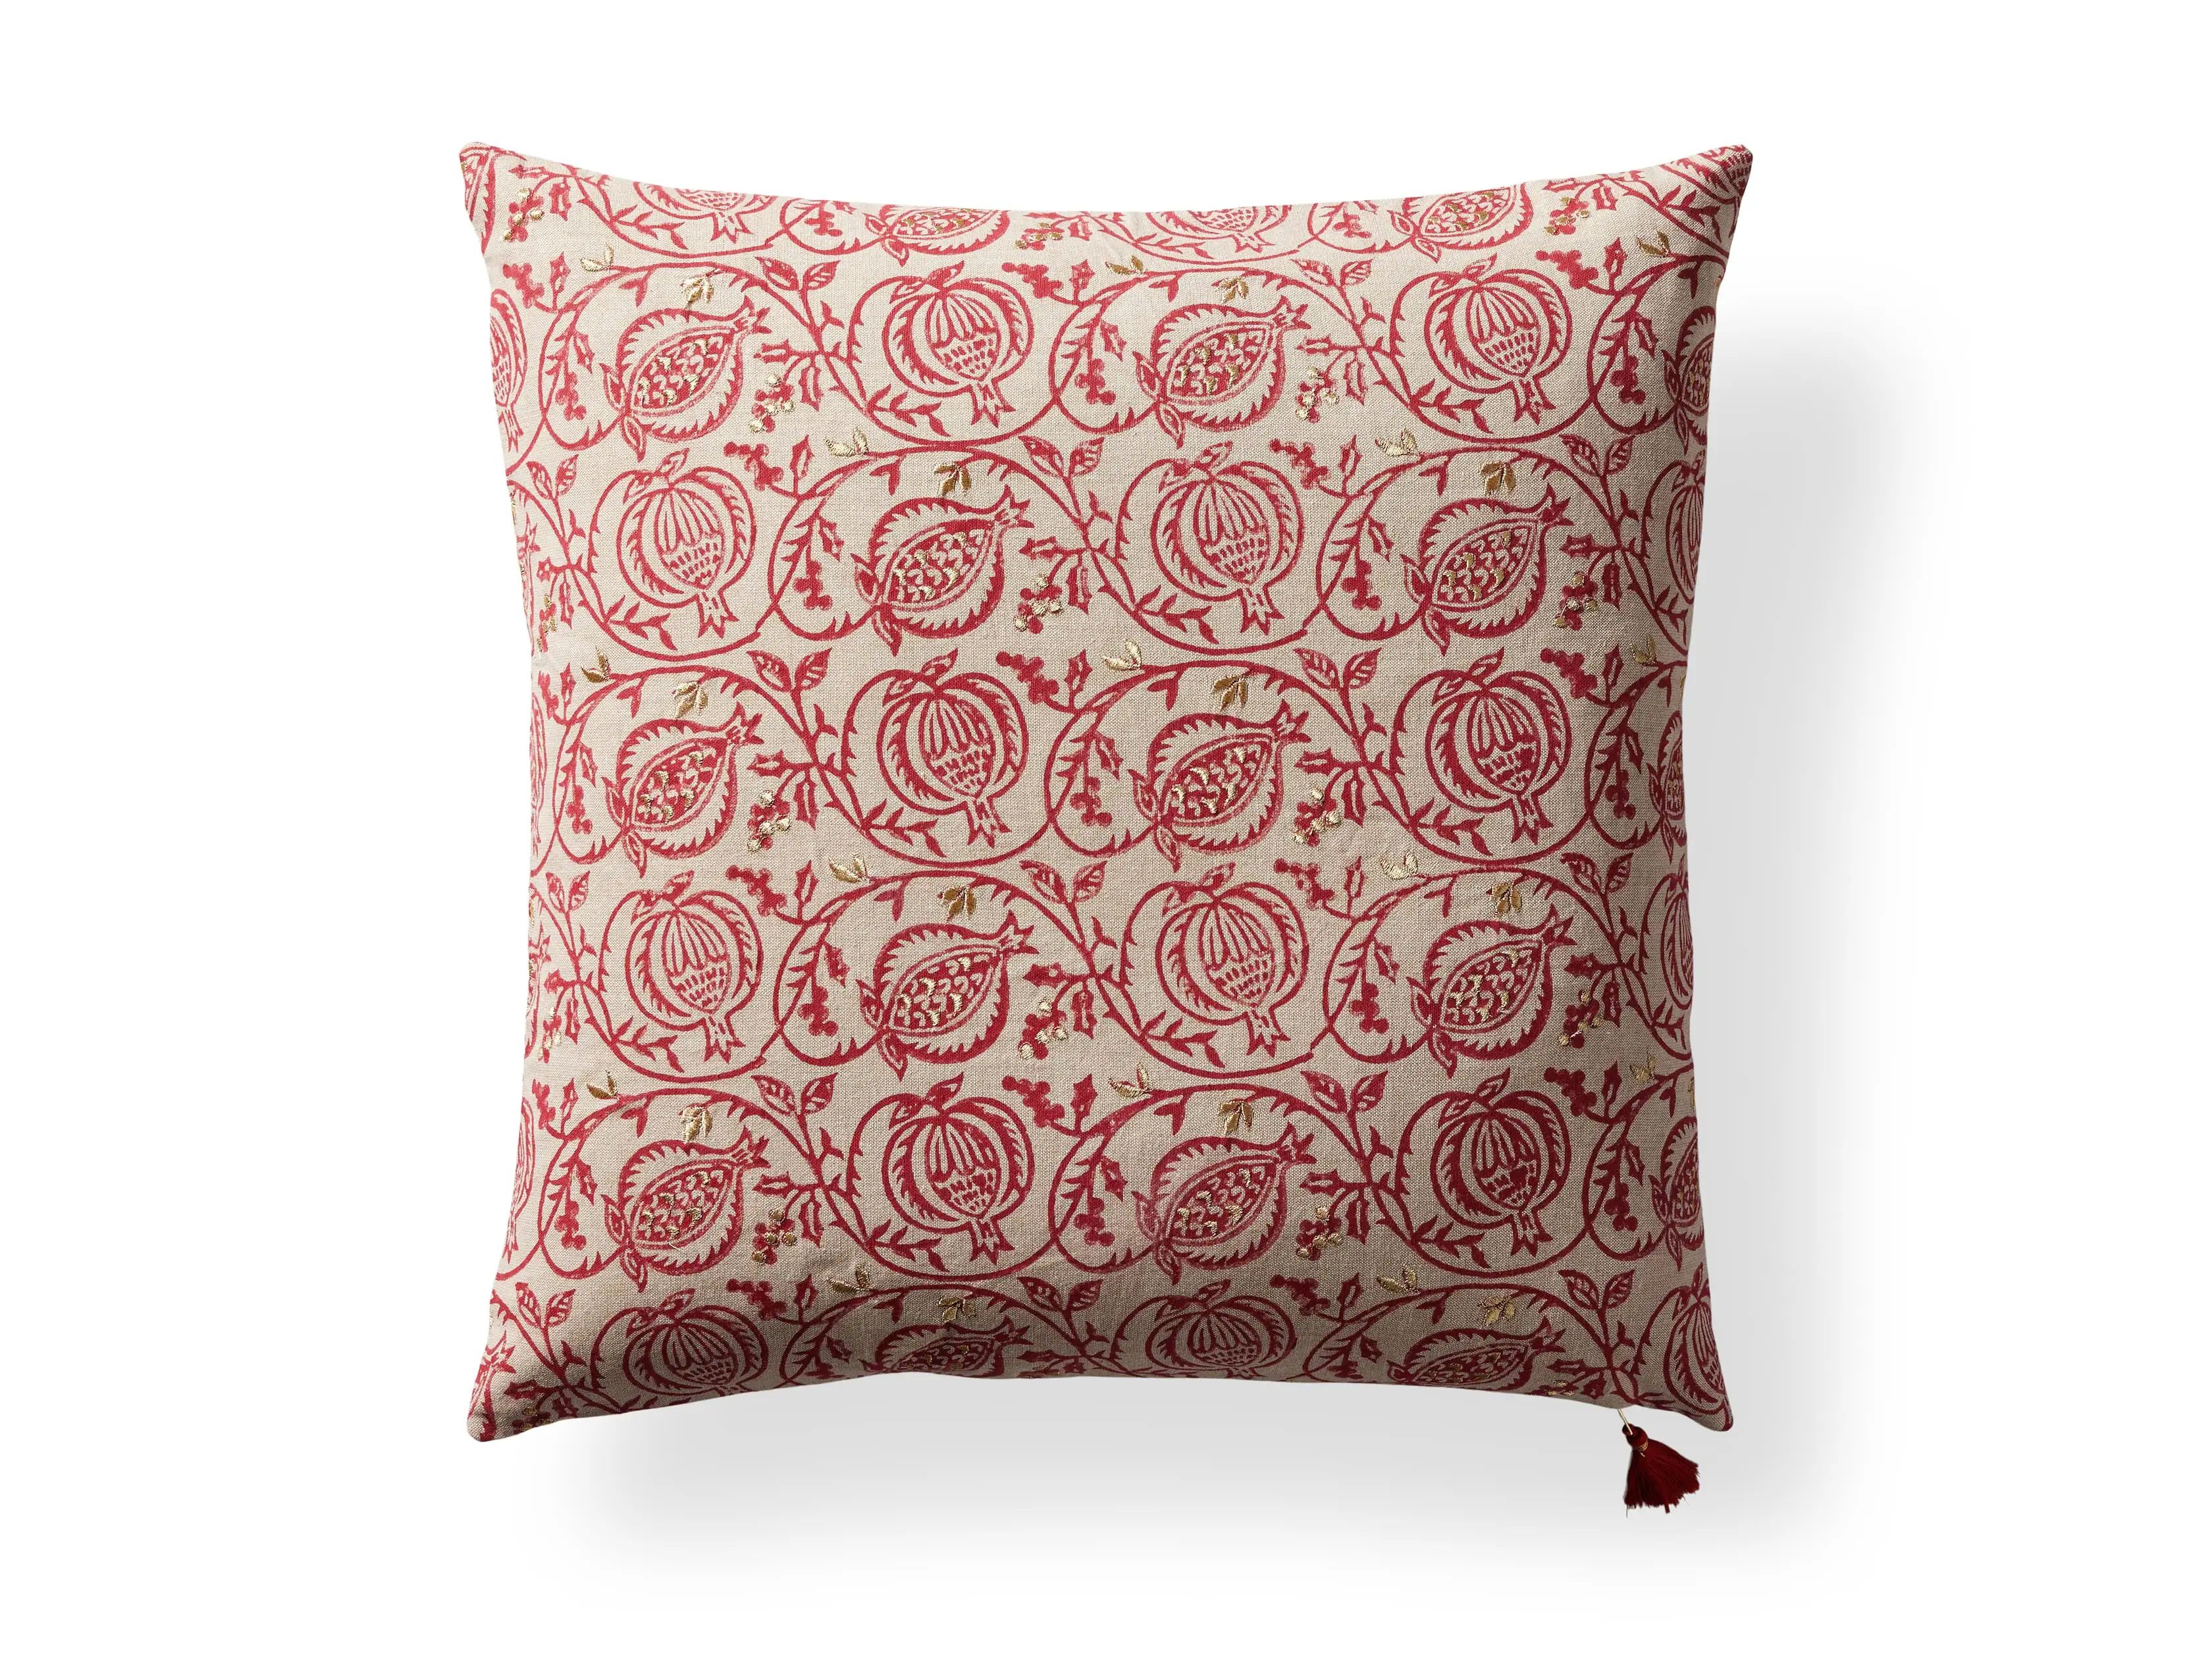 Pomegranate Pillow Cover | Arhaus